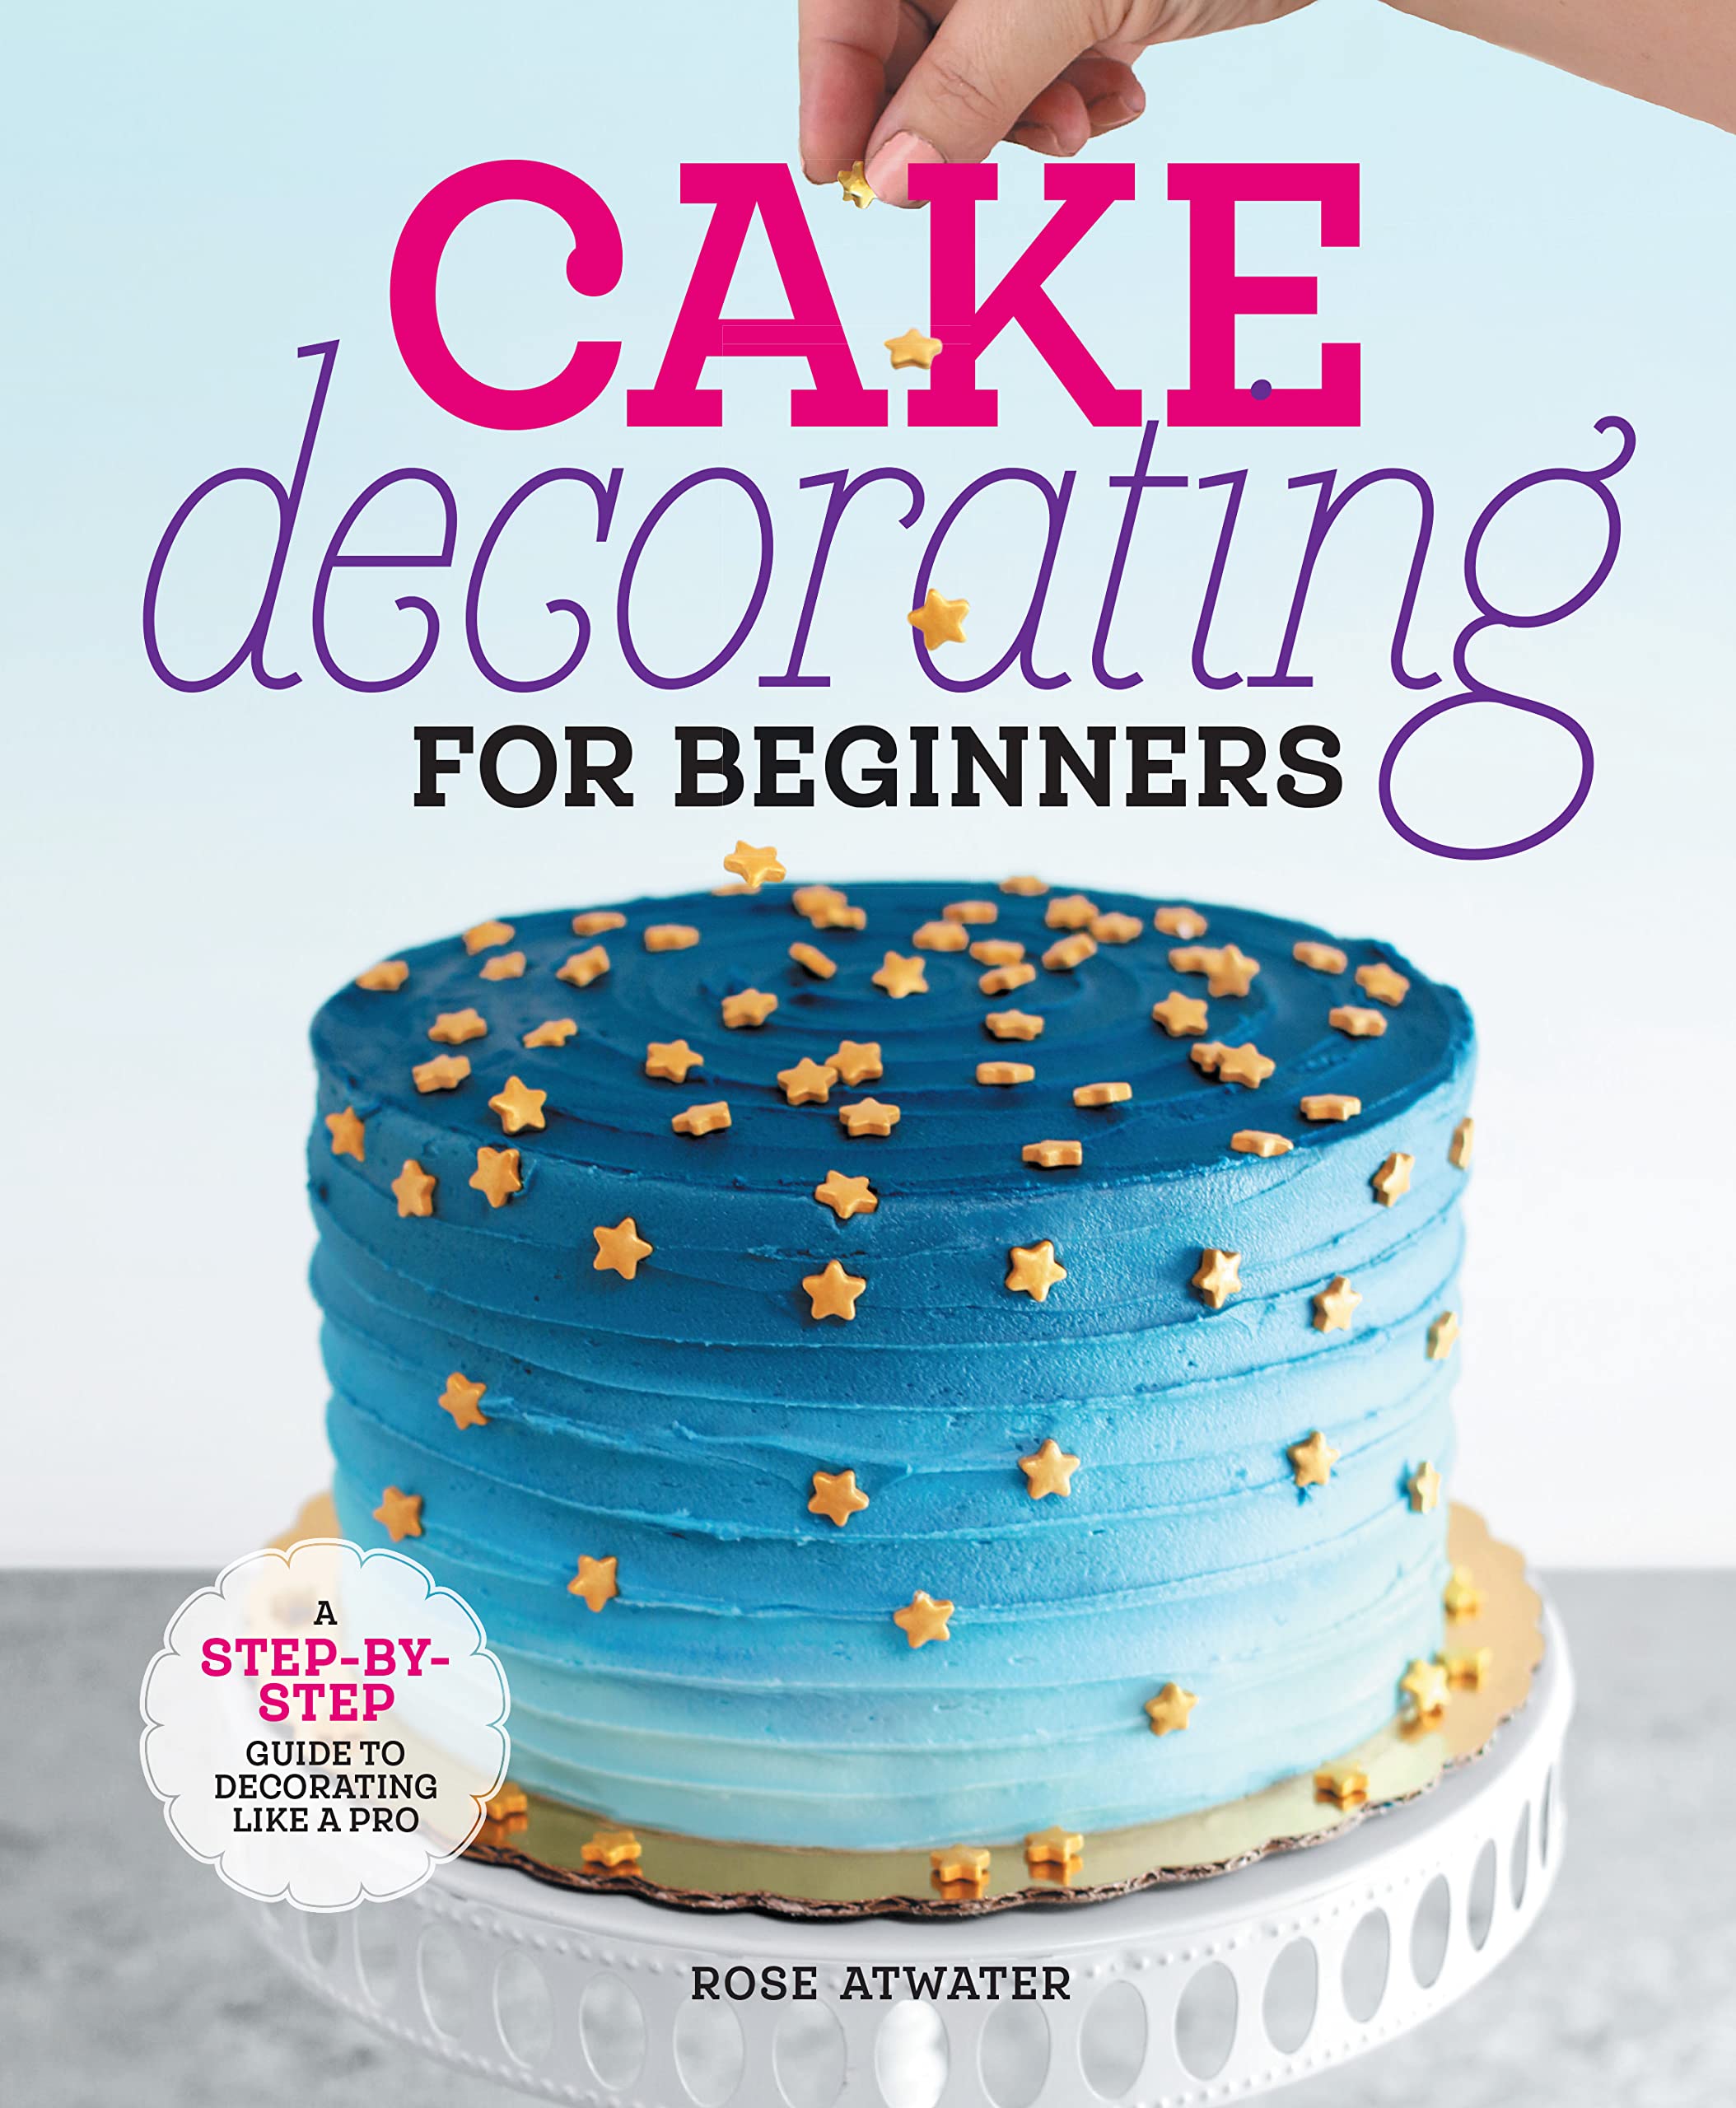 5 tips for cake decorating beginner to make beautiful cakes